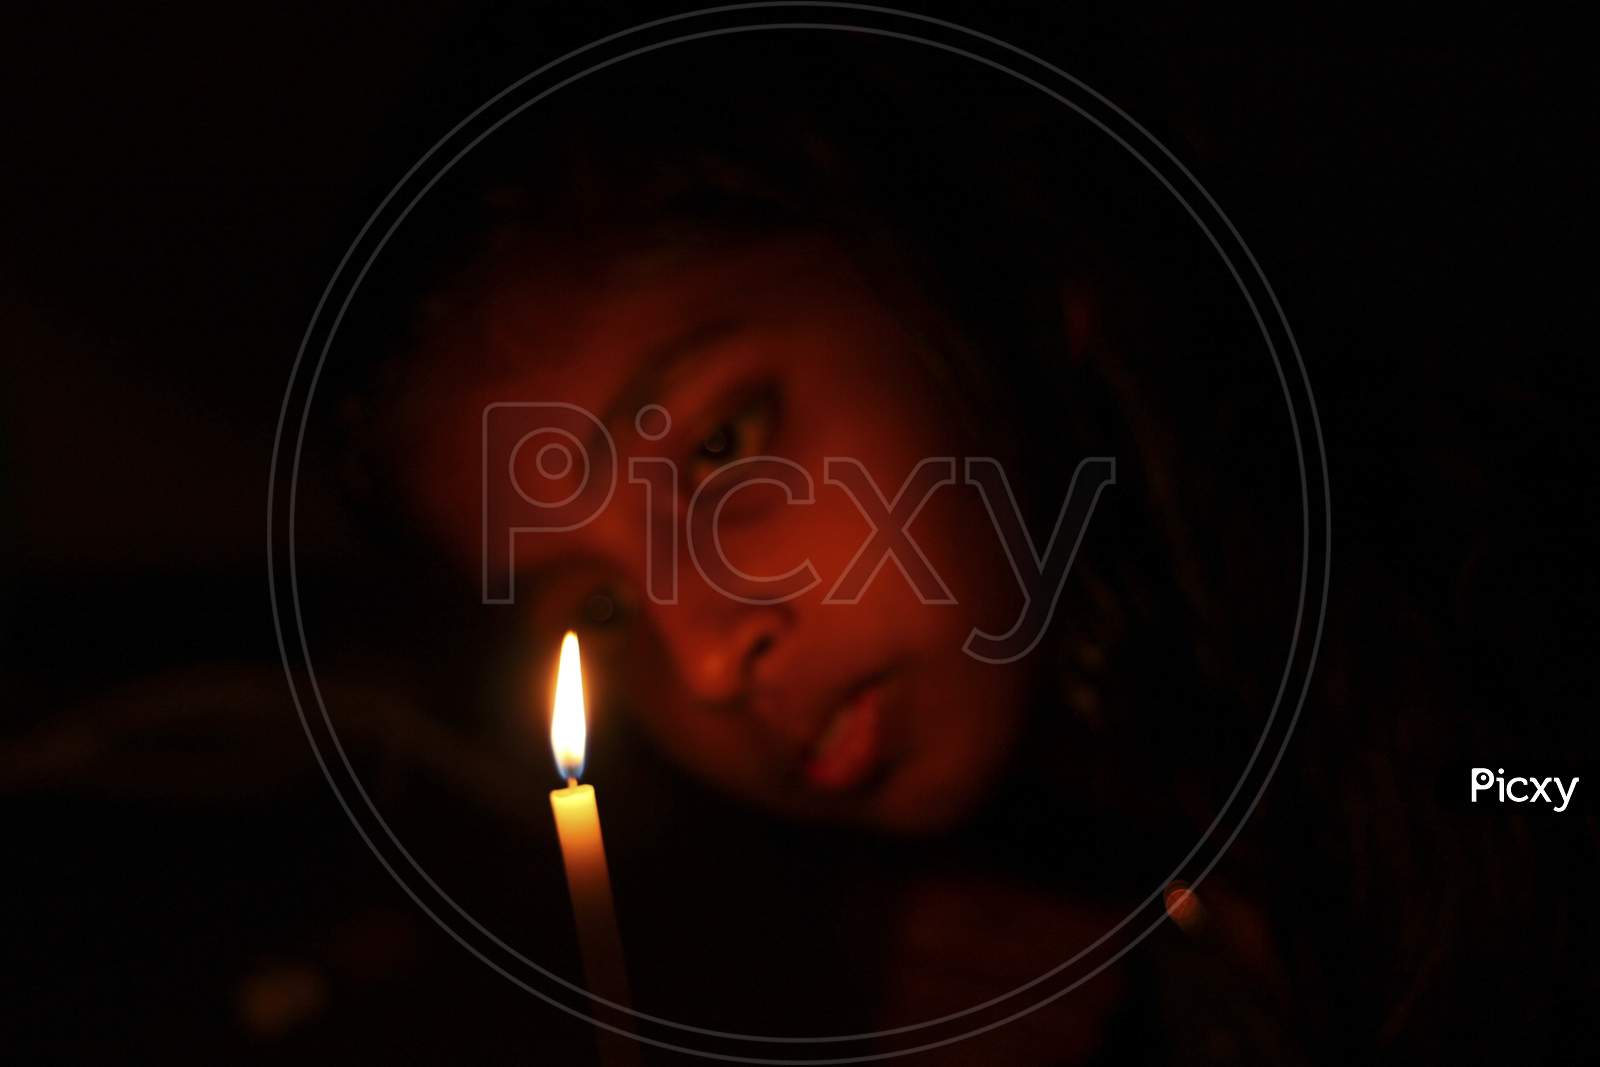 Girl Looking On A Candle Flame In Sad Mood